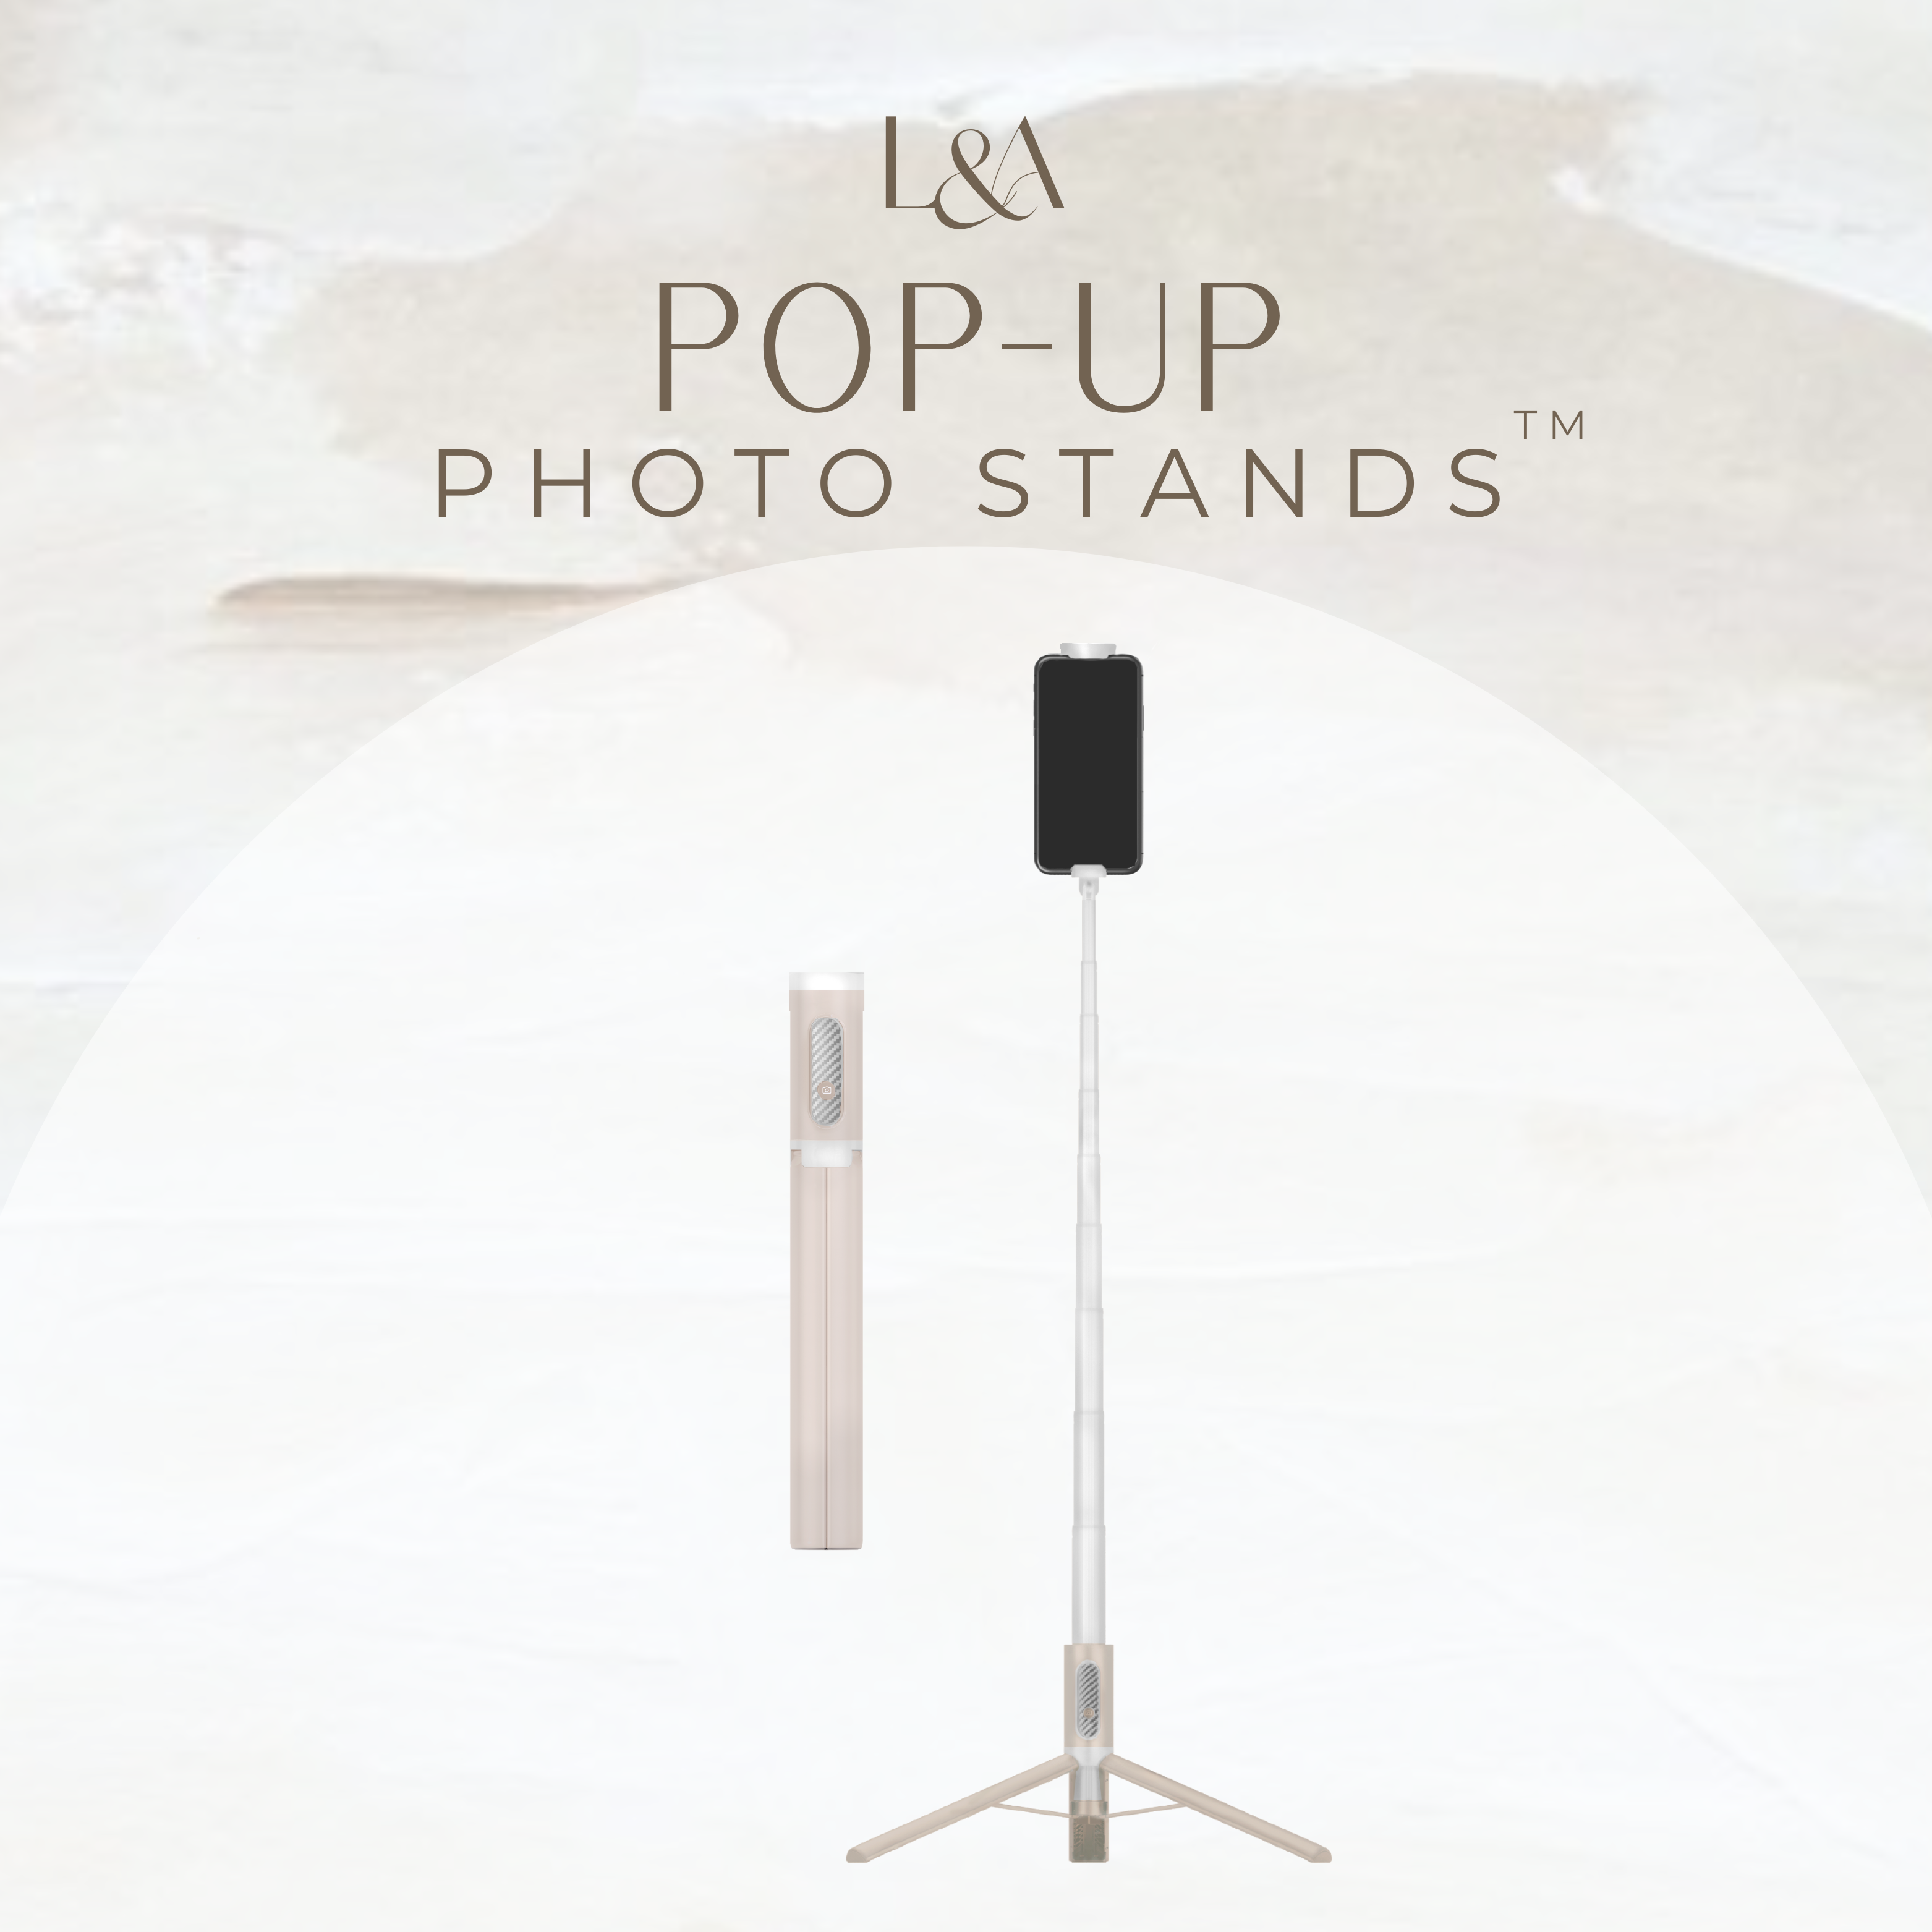 Pop-Up Photo Stand – The Light & Airy Photographer